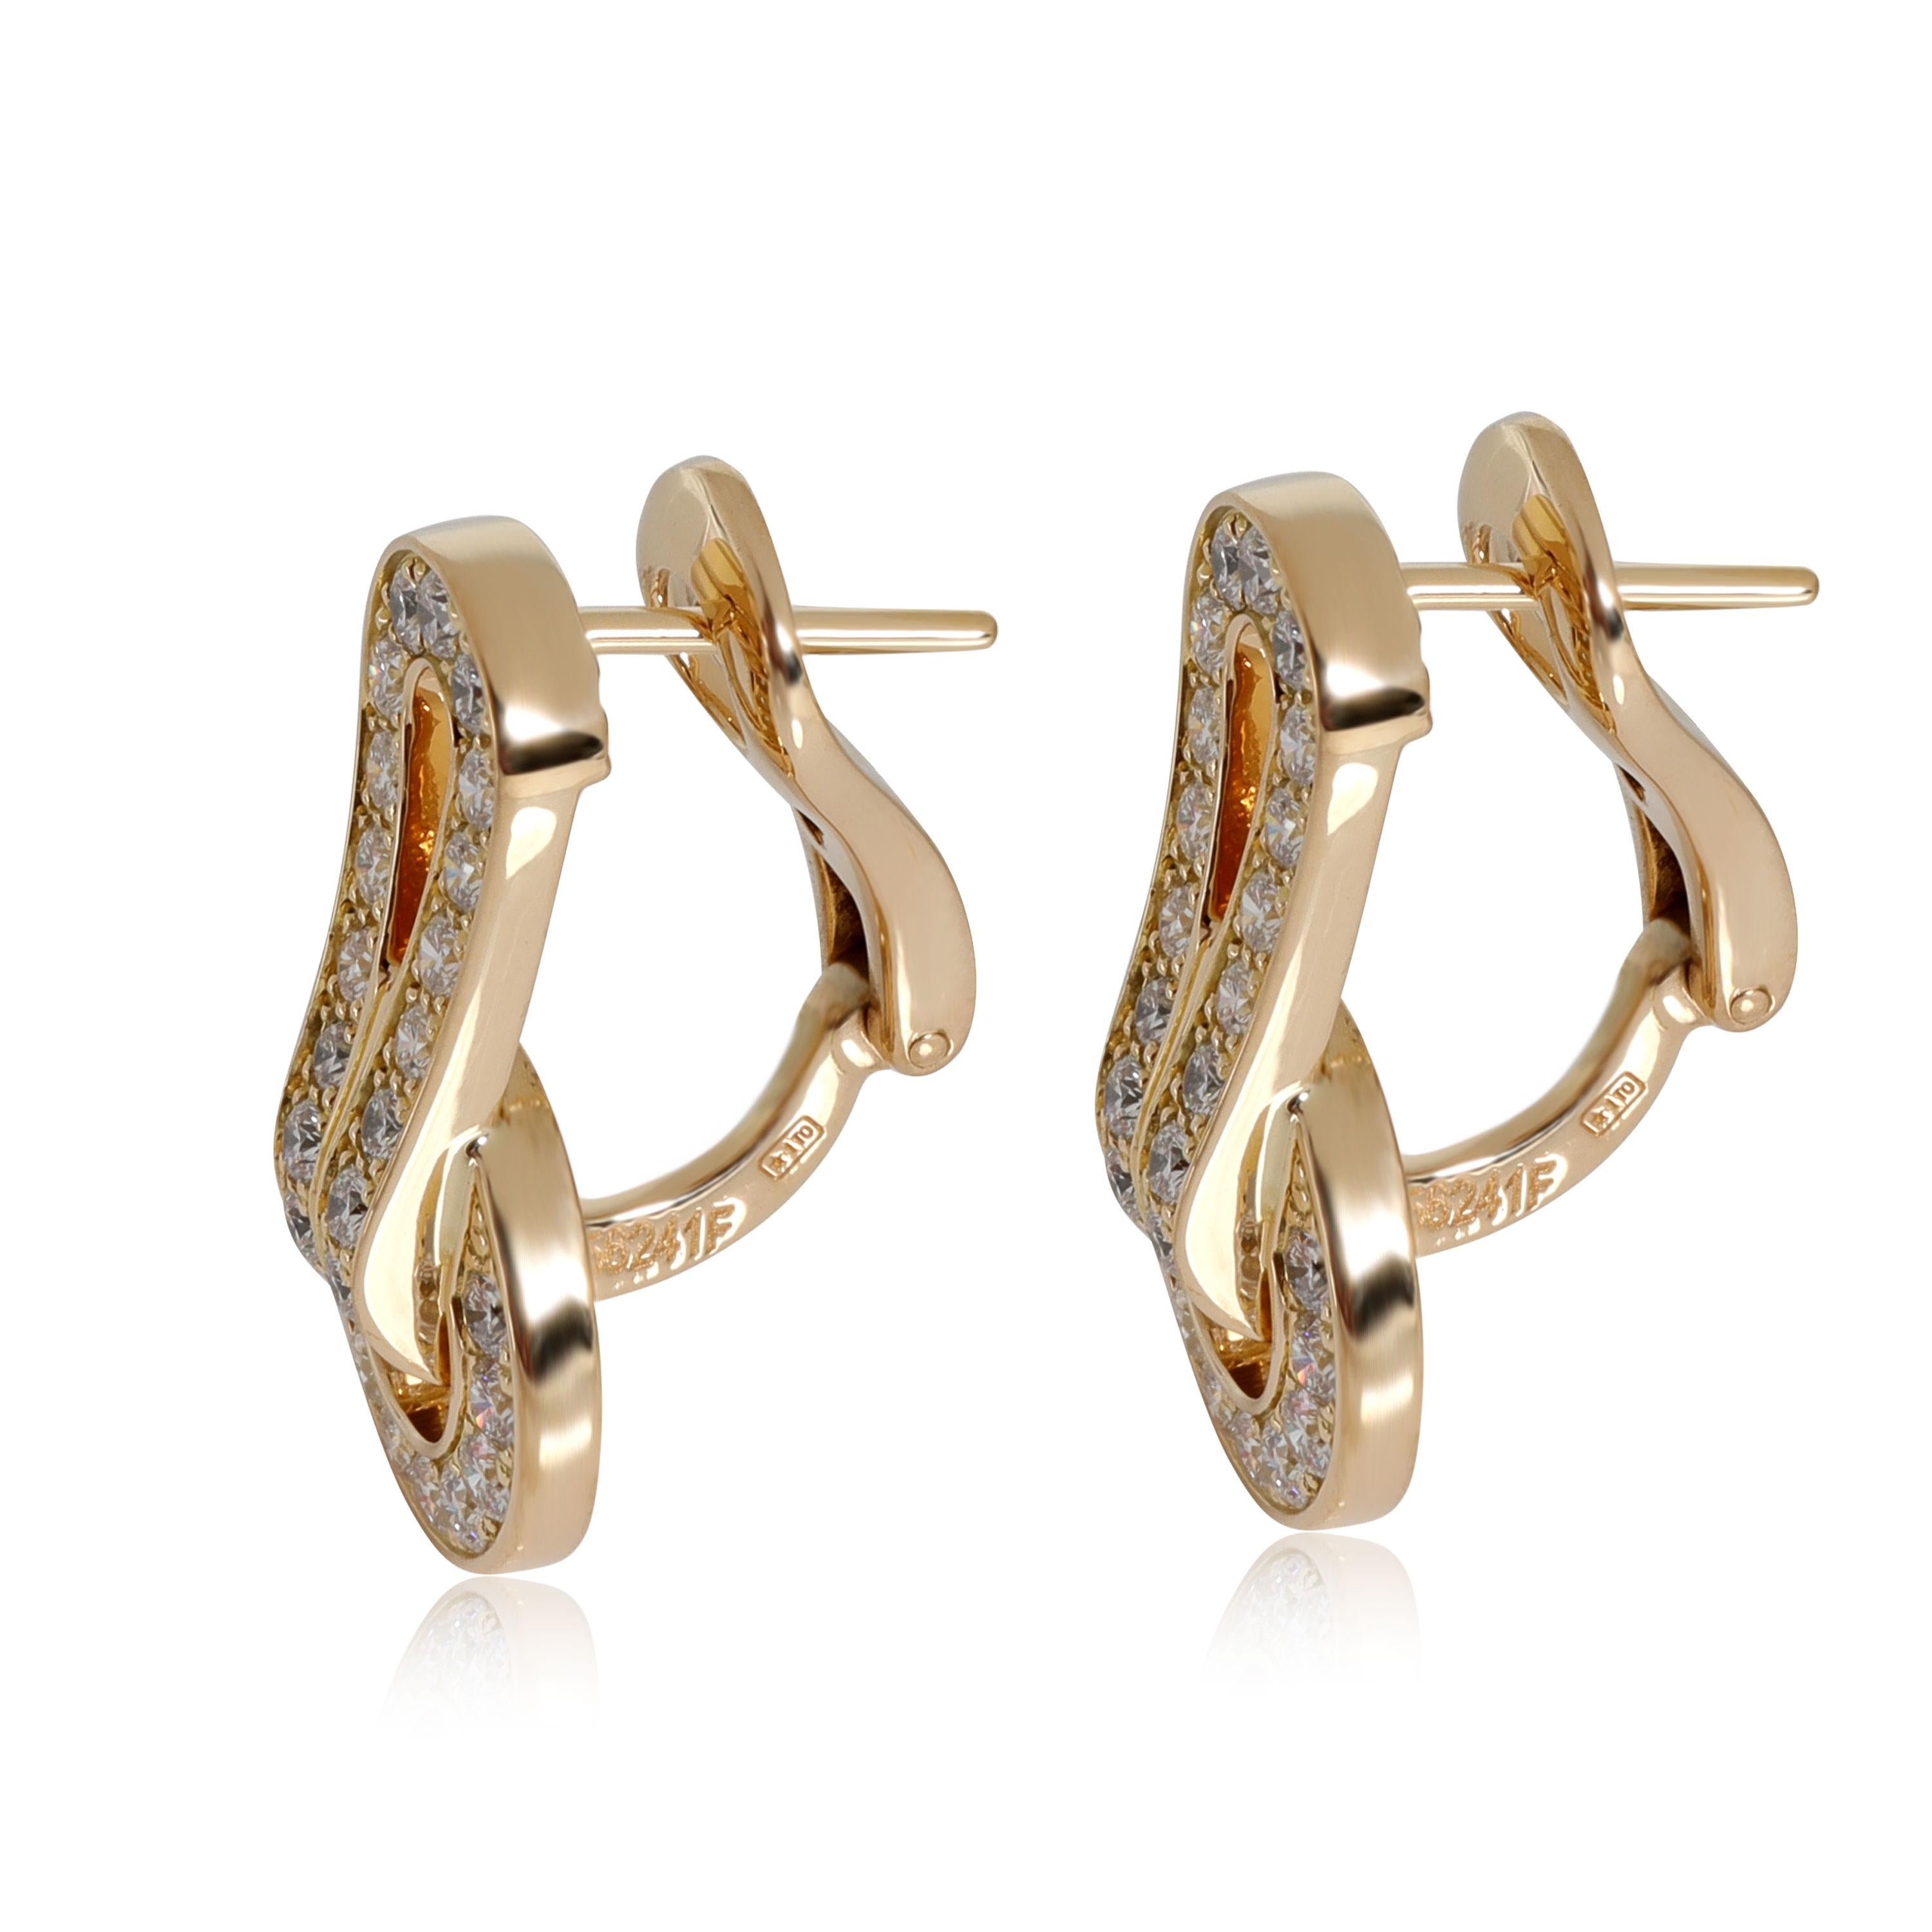 Cartier Agrafe Diamond Earrings in 18K Yellow Gold 1.24 CTW

PRIMARY DETAILS
SKU: 115528
Listing Title: Cartier Agrafe Diamond Earrings in 18K Yellow Gold 1.24 CTW
Condition Description: Retails for 12.000 USD. In excellent condition and recently